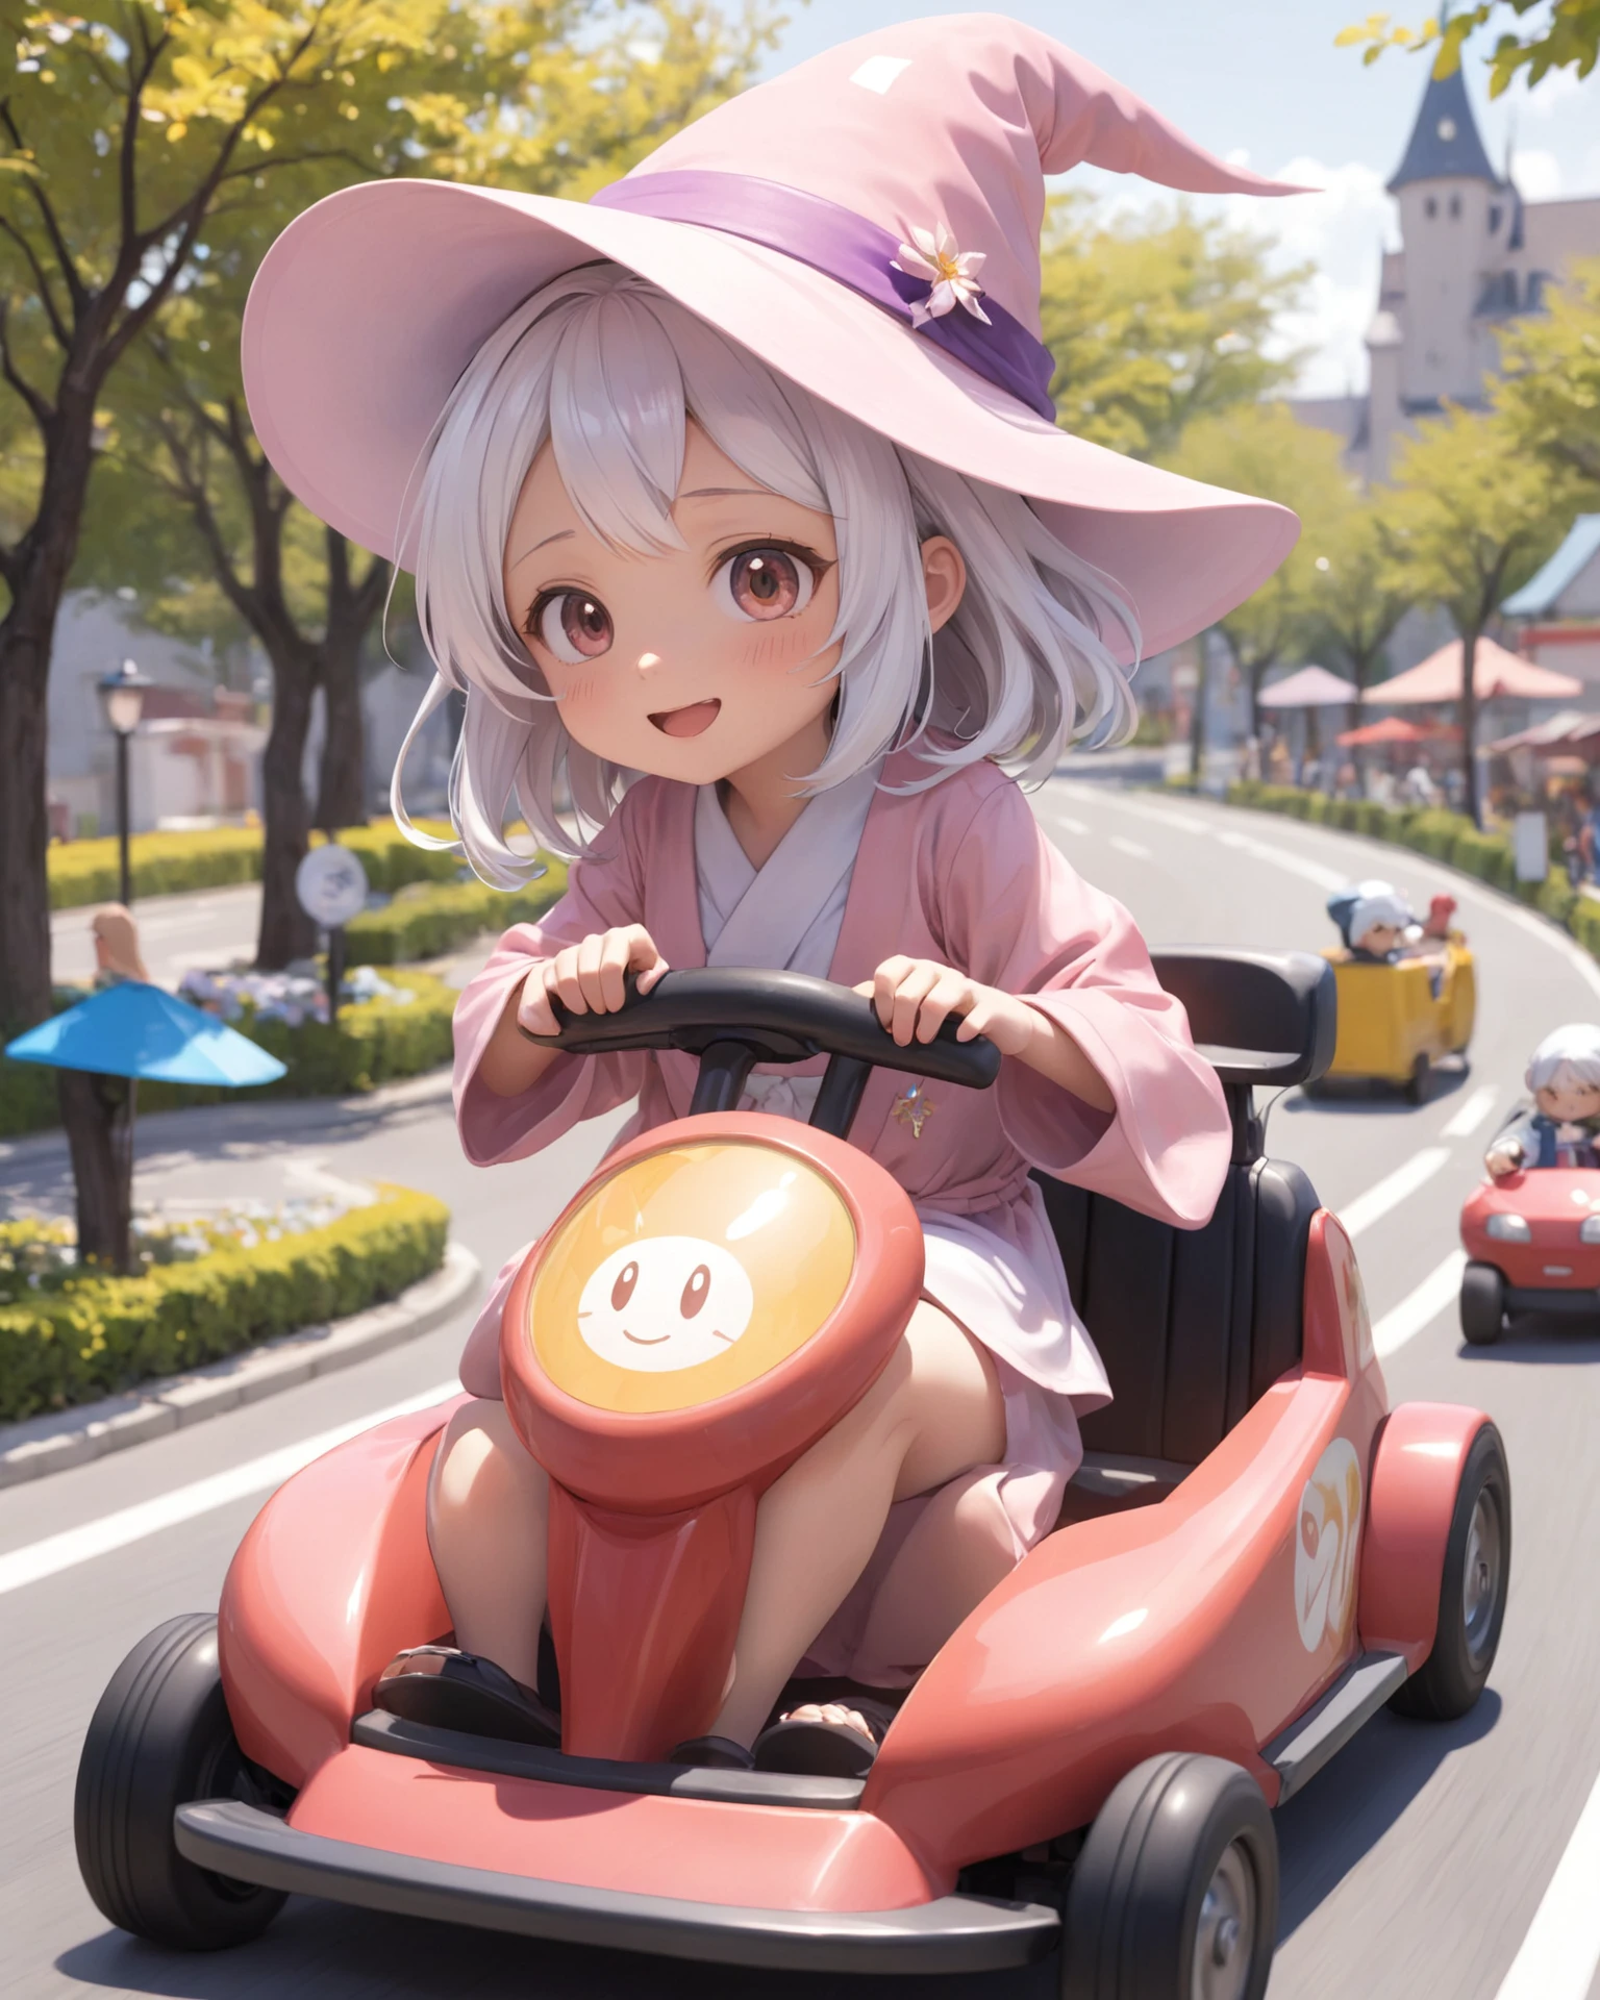 A Little Girl Driving a Cart with Smiling Face on It